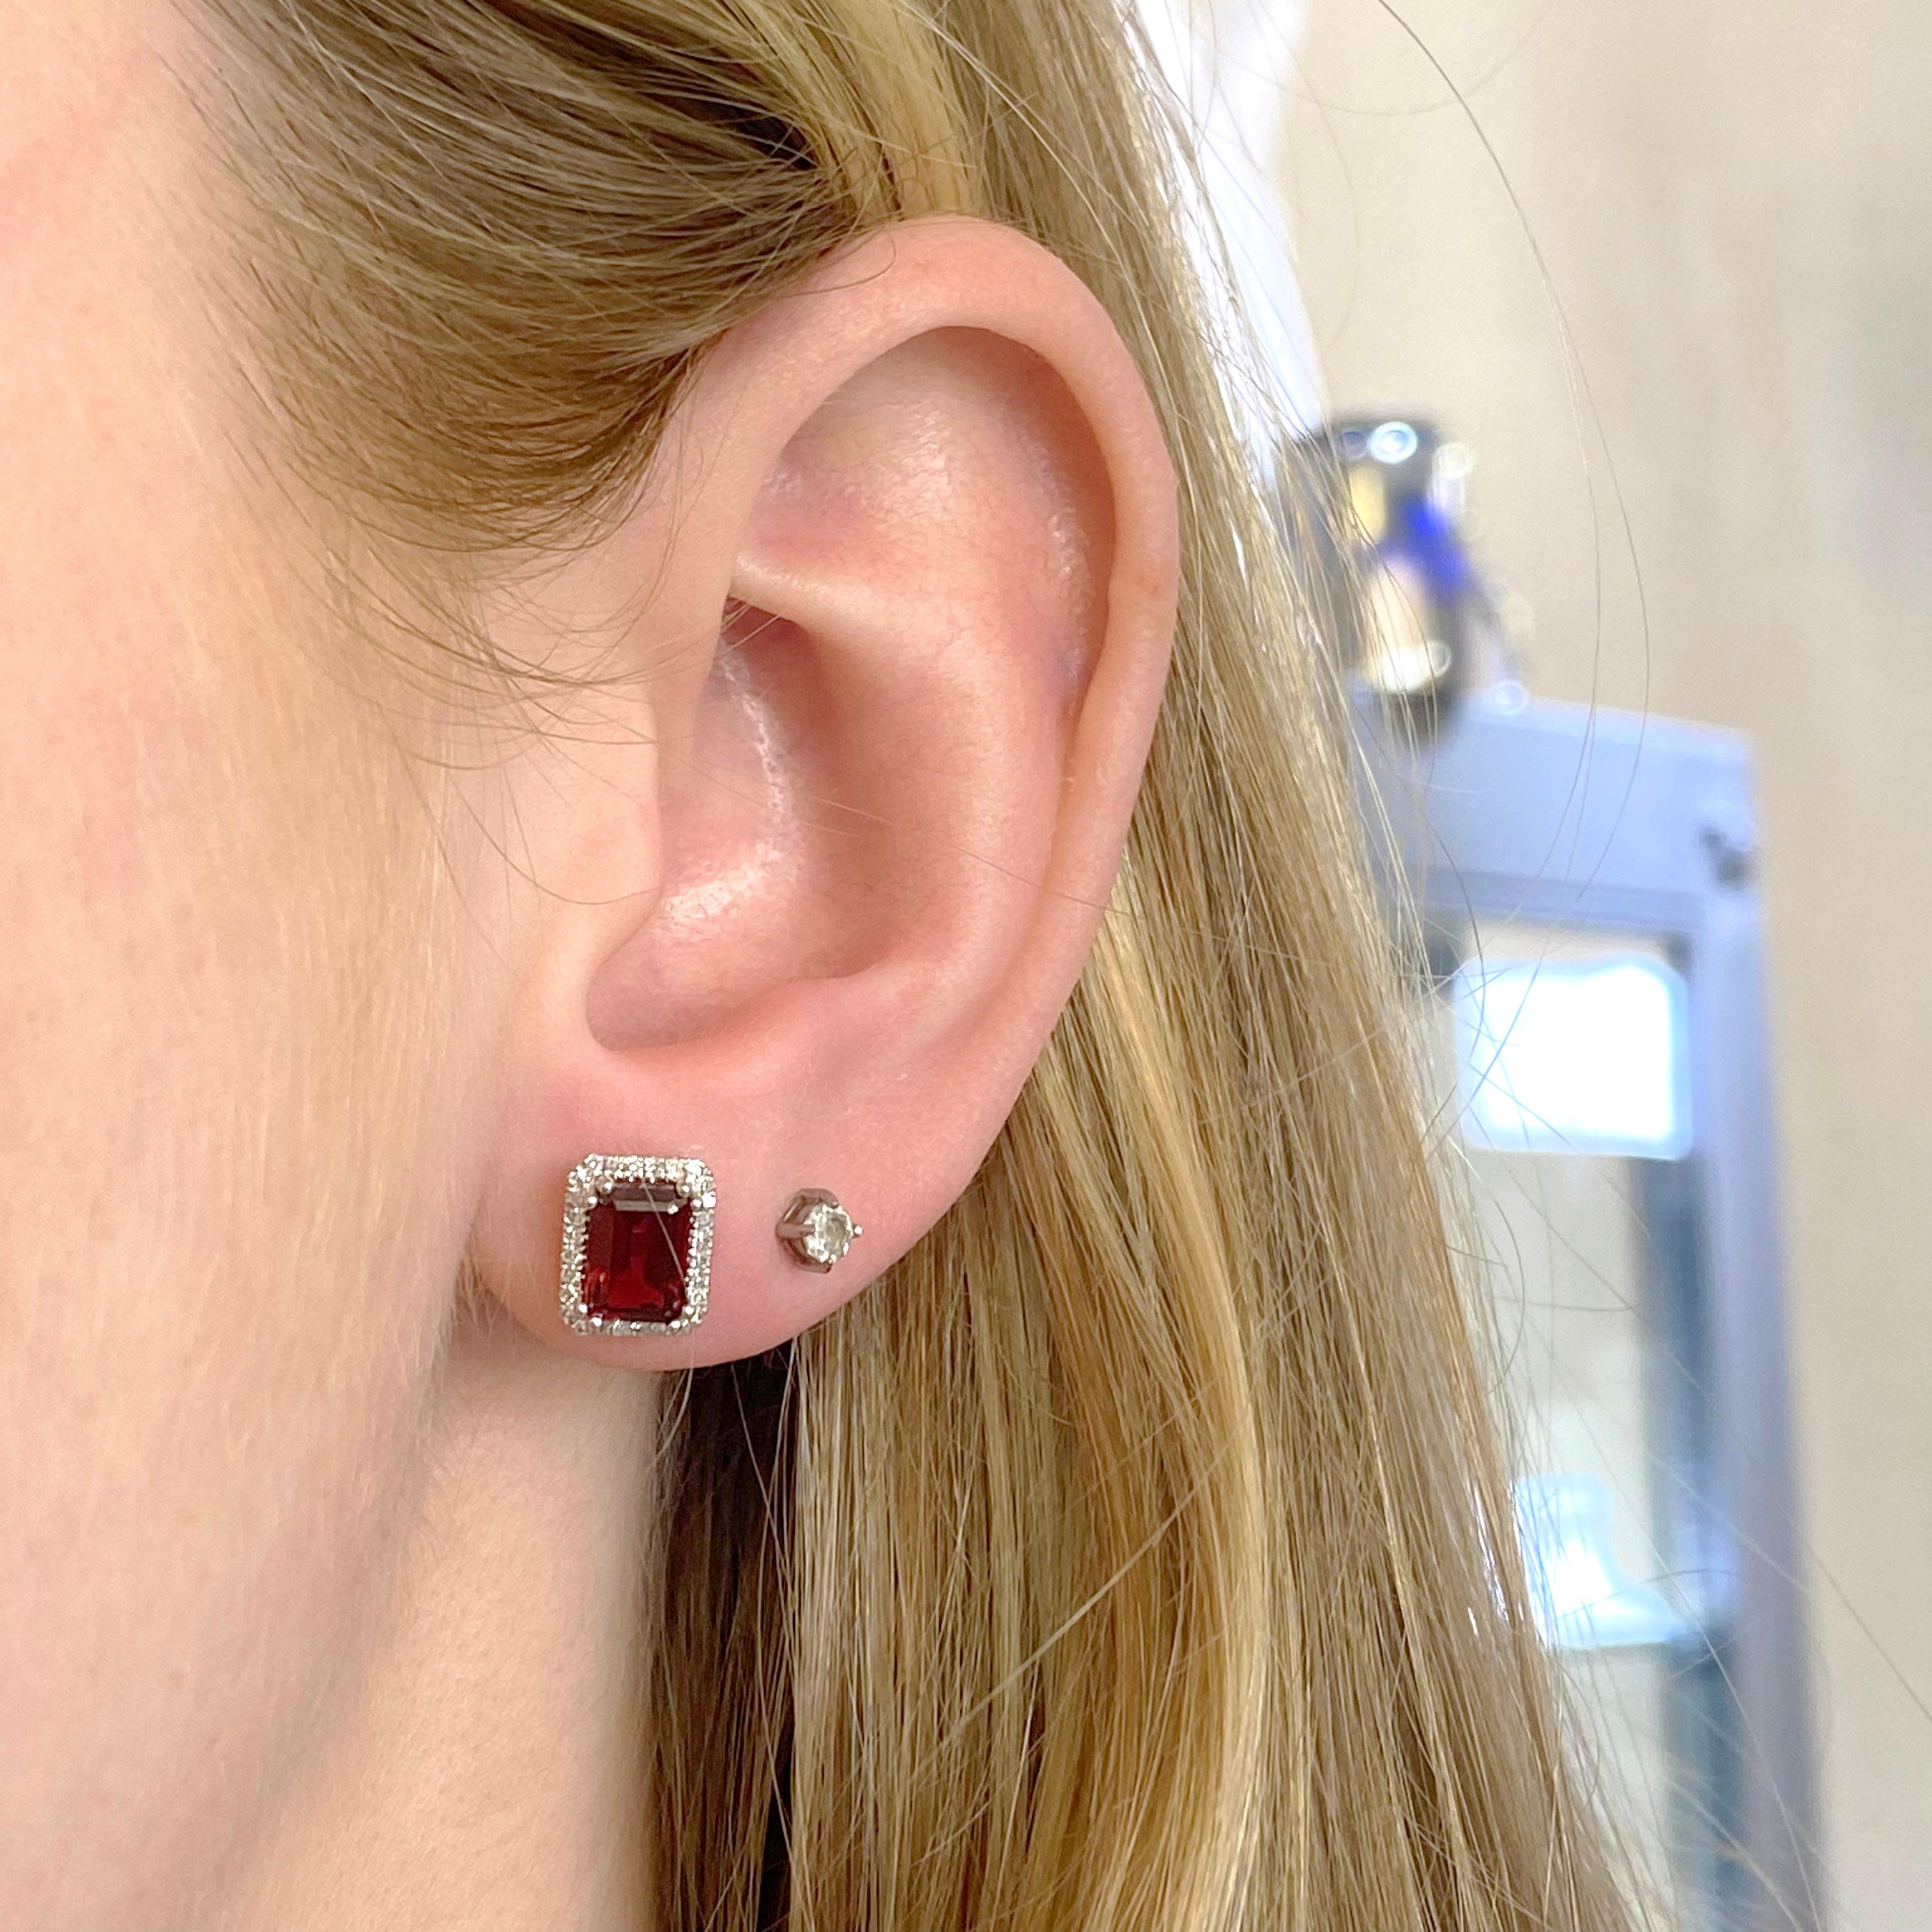 These emerald cut garnet earrings have 28 diamonds going around each gemstone. The diamonds are all natural and each have top color and clarity for maximum brilliance and sparkle! Garnets are a gorgeous red color and are a great staple to any fine